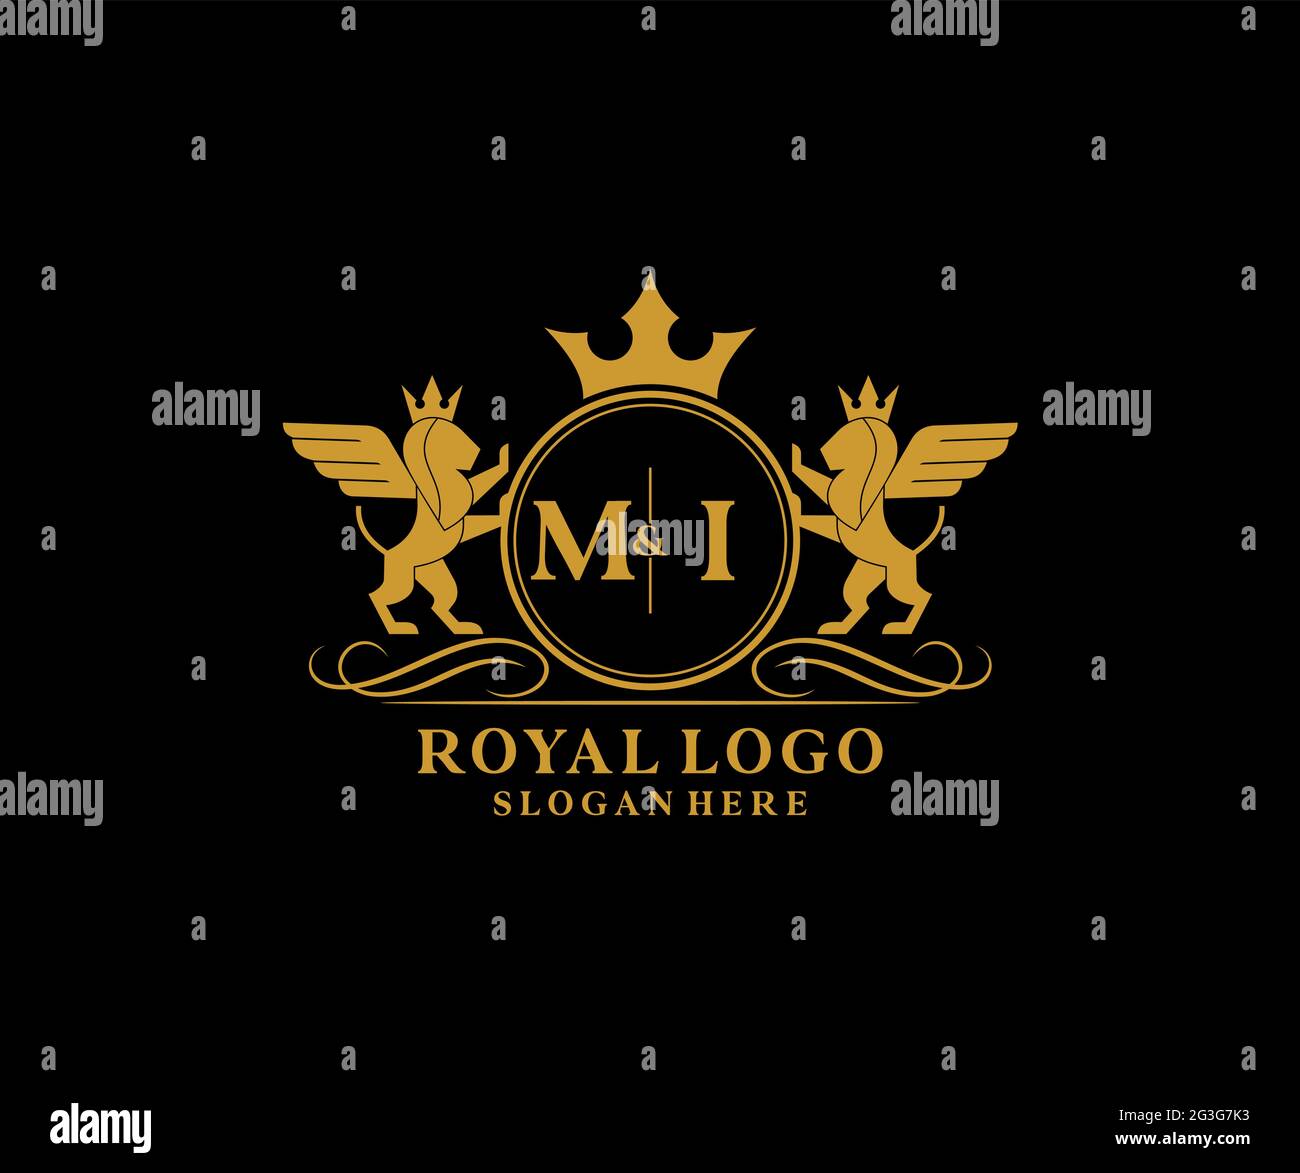 MI Letter Lion Royal Luxury Heraldic,Crest Logo template in vector art for Restaurant, Royalty, Boutique, Cafe, Hotel, Heraldic, Jewelry, Fashion and Stock Vector